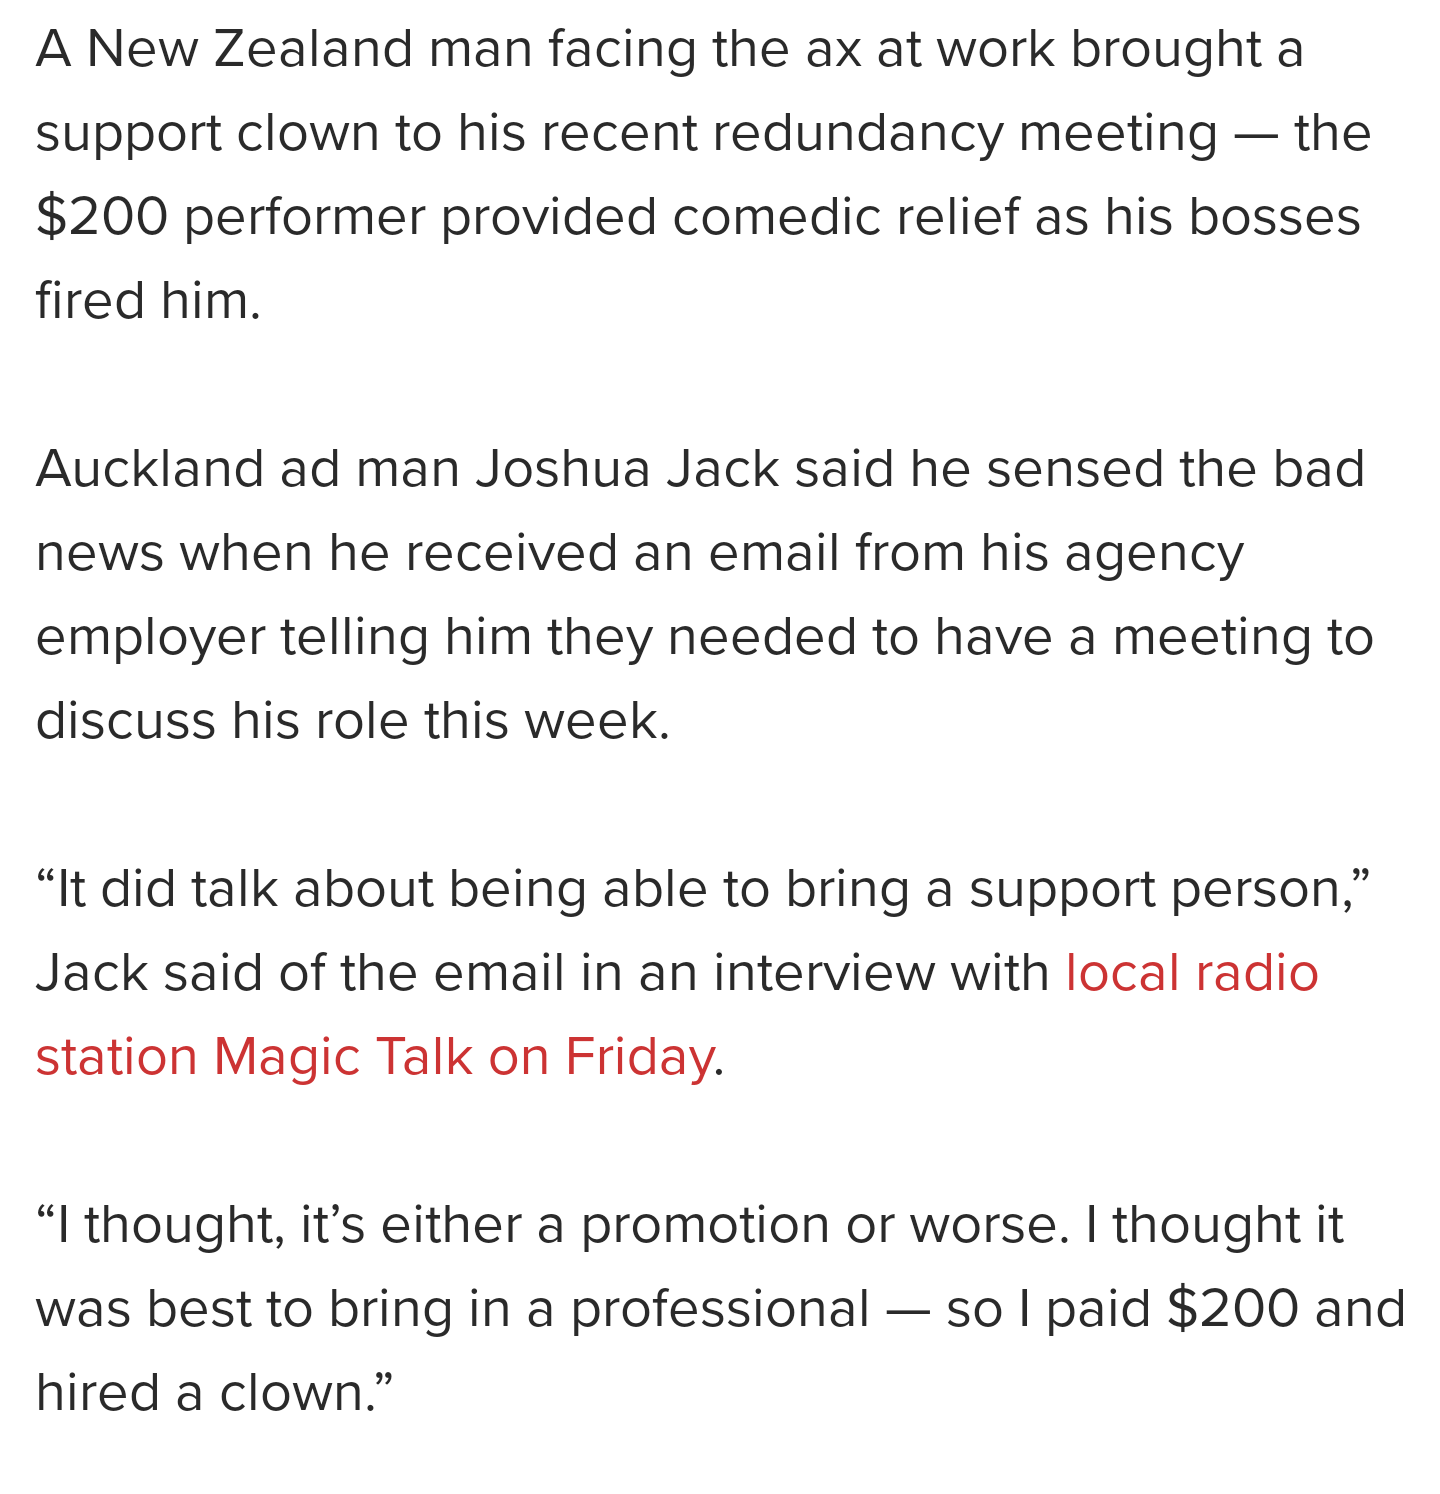 angle - A New Zealand man facing the ax at work brought a support clown to his recent redundancy meeting the $200 performer provided comedic relief as his bosses fired him. Auckland ad man Joshua Jack said he sensed the bad news when he received an email